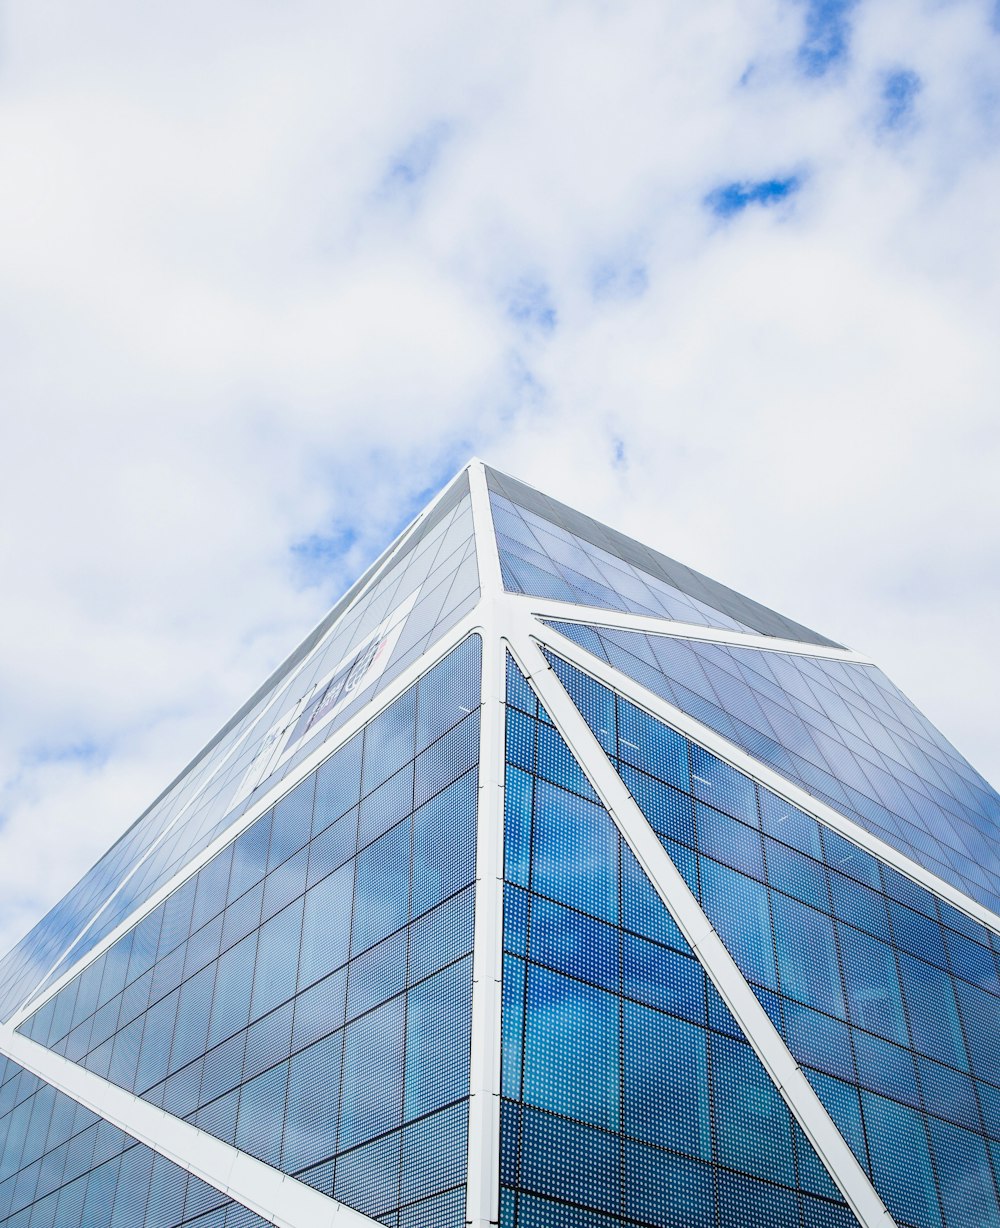 glass building under cloudy sky during daytime